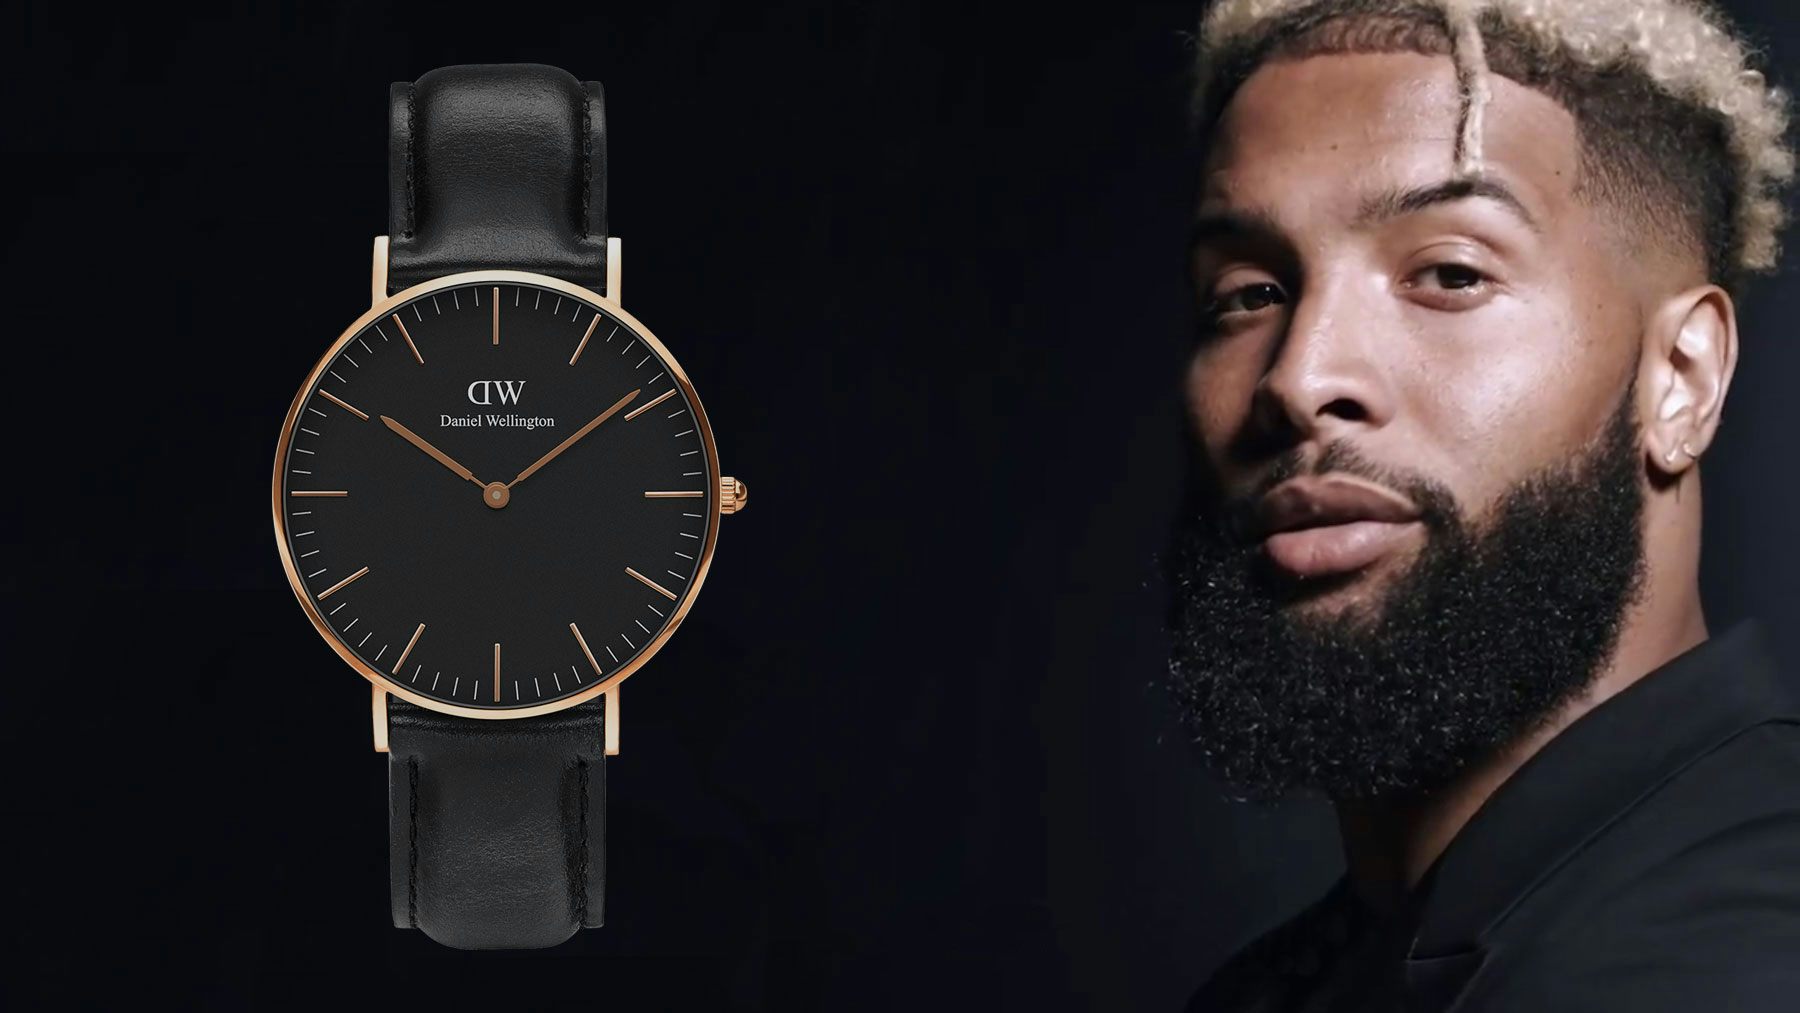 Grønland betale teenagere Editorial: Odell Beckham Jr. And Daniel Wellington Might Have Just Played  Us All - HODINKEE